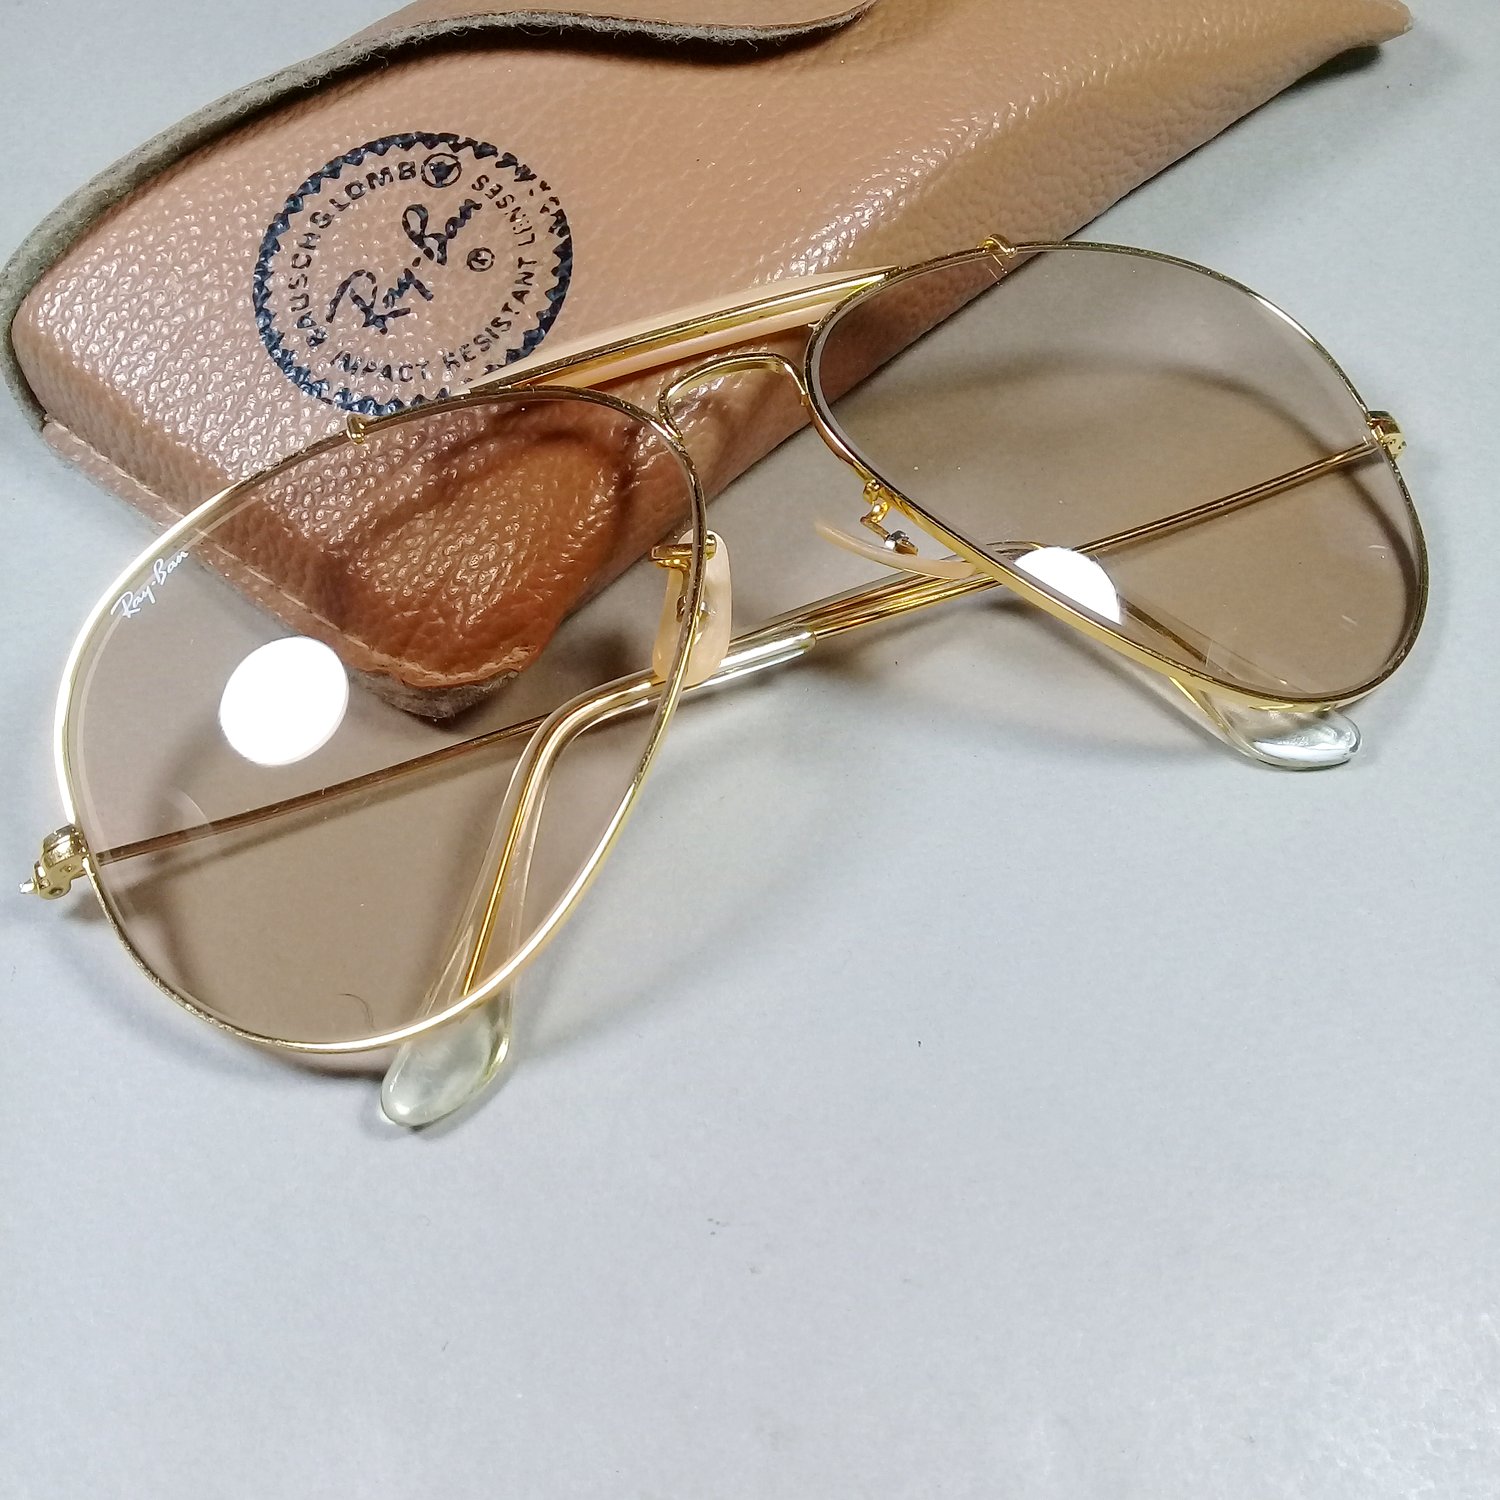 Vintage B&L RAY BAN Made in USA Gold Plated Metal Aviator